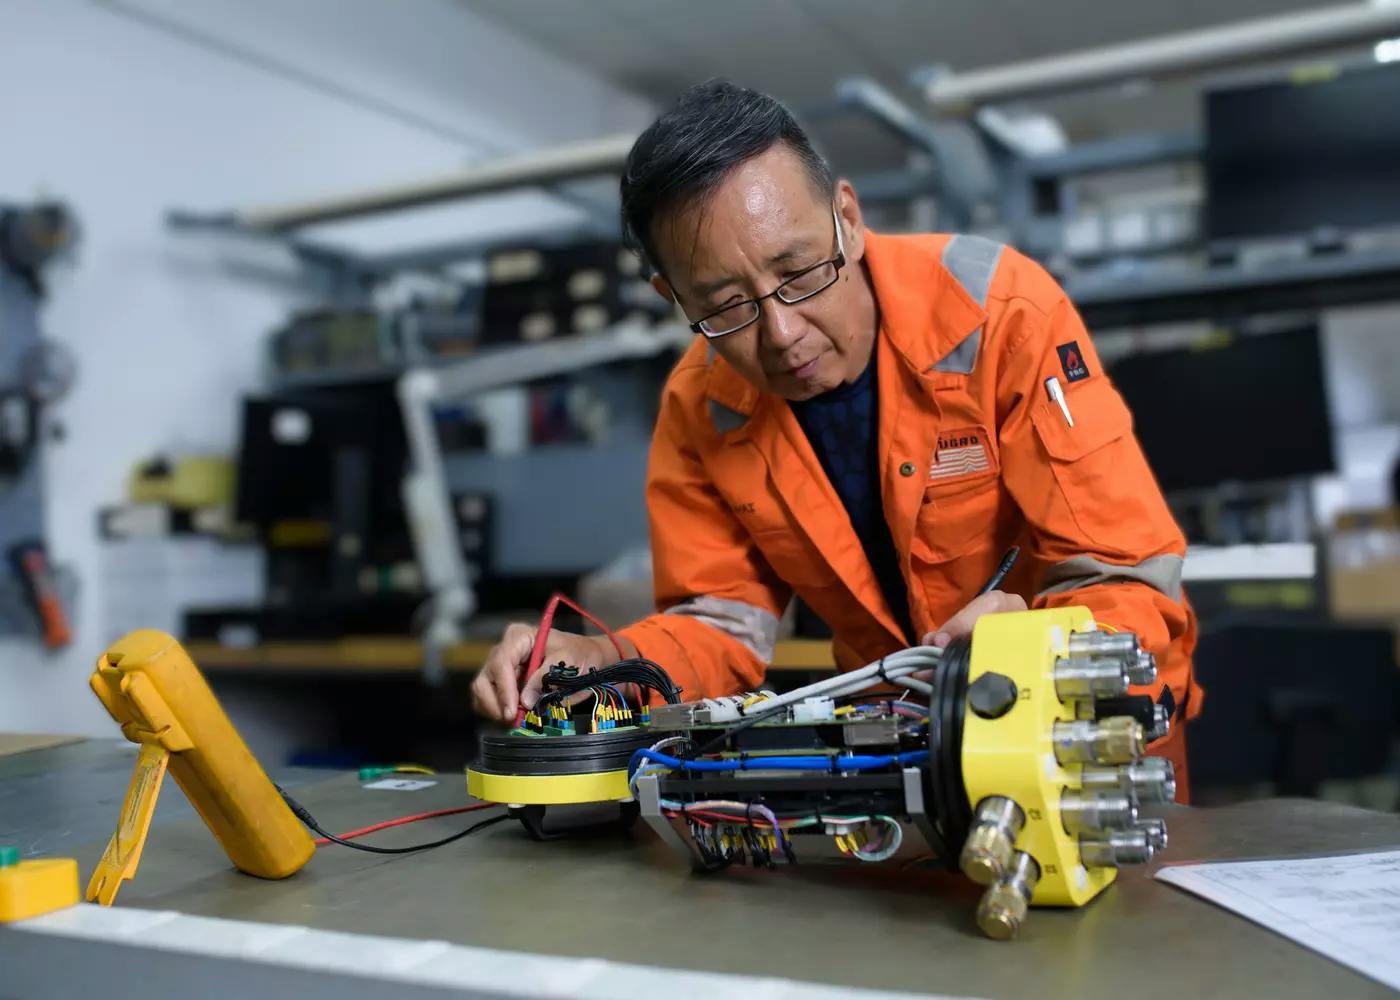 Singapore
Assembling and testing electrical components for the Blue Volta eROV